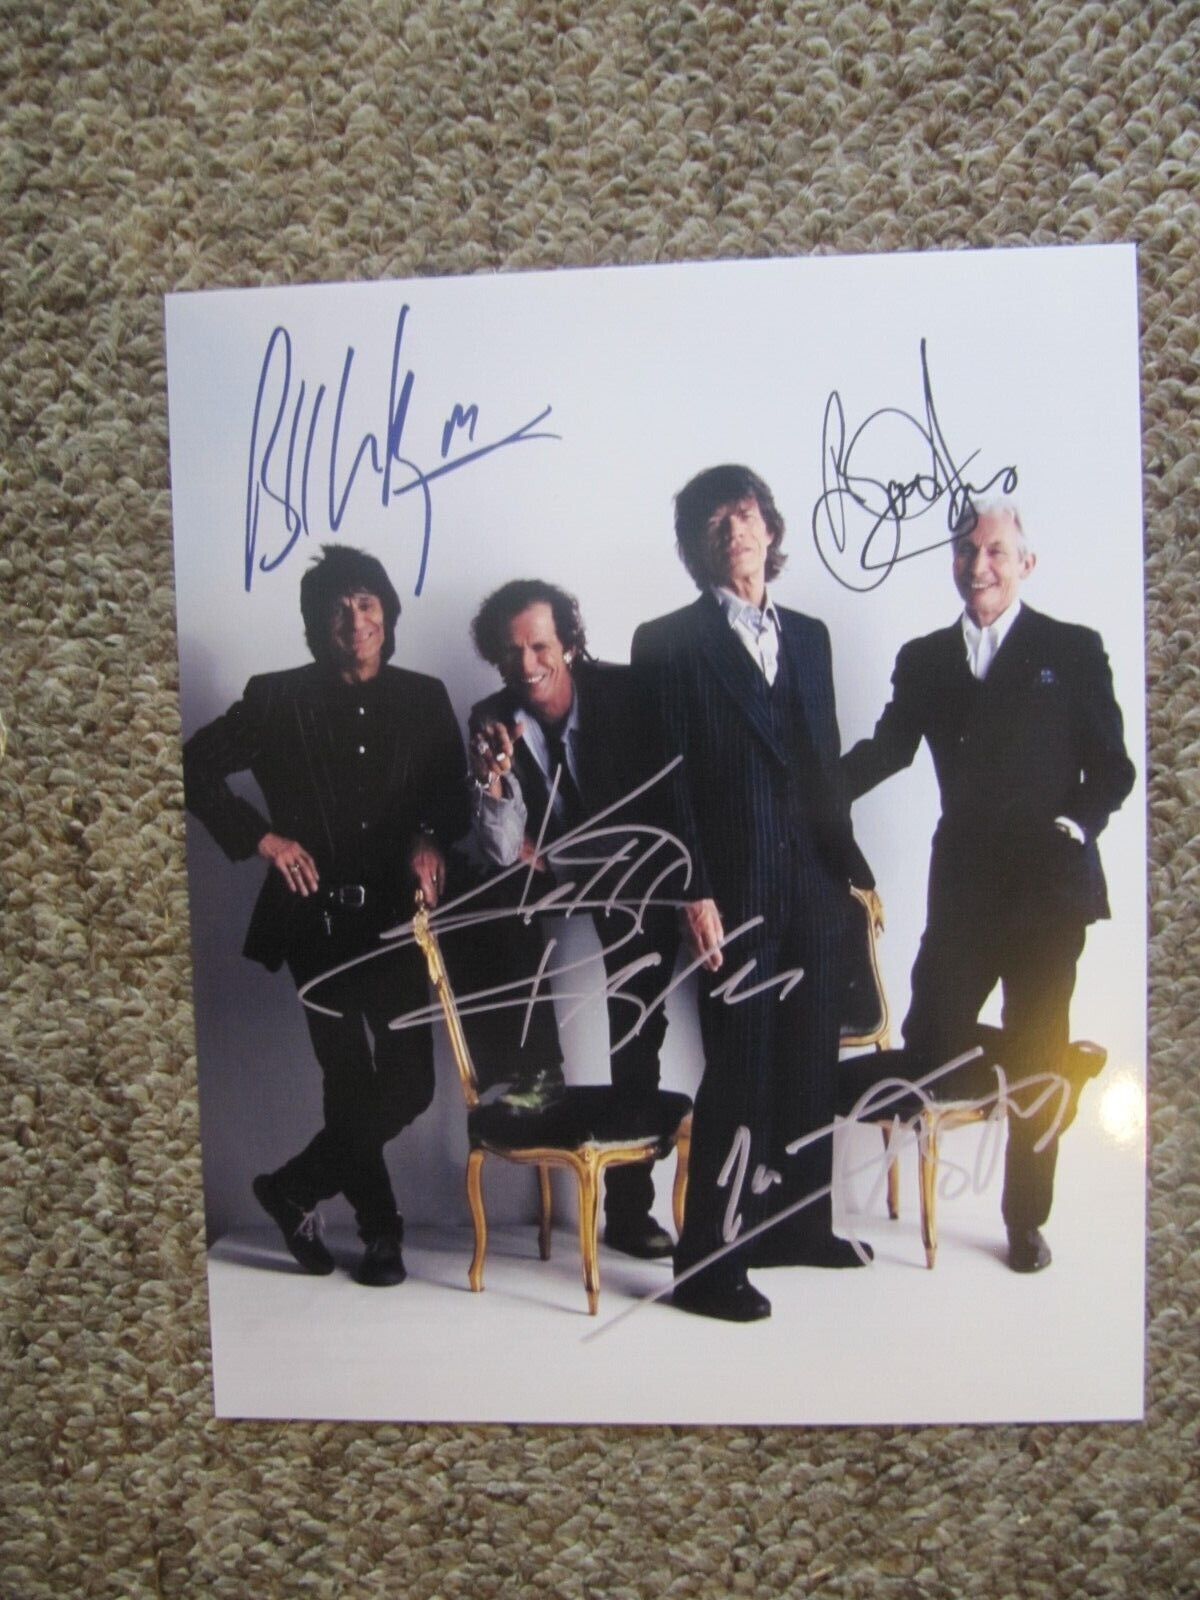 Rolling Stones Concert Collection. Signed Photo, Tour Programs, Tickets, Etc.